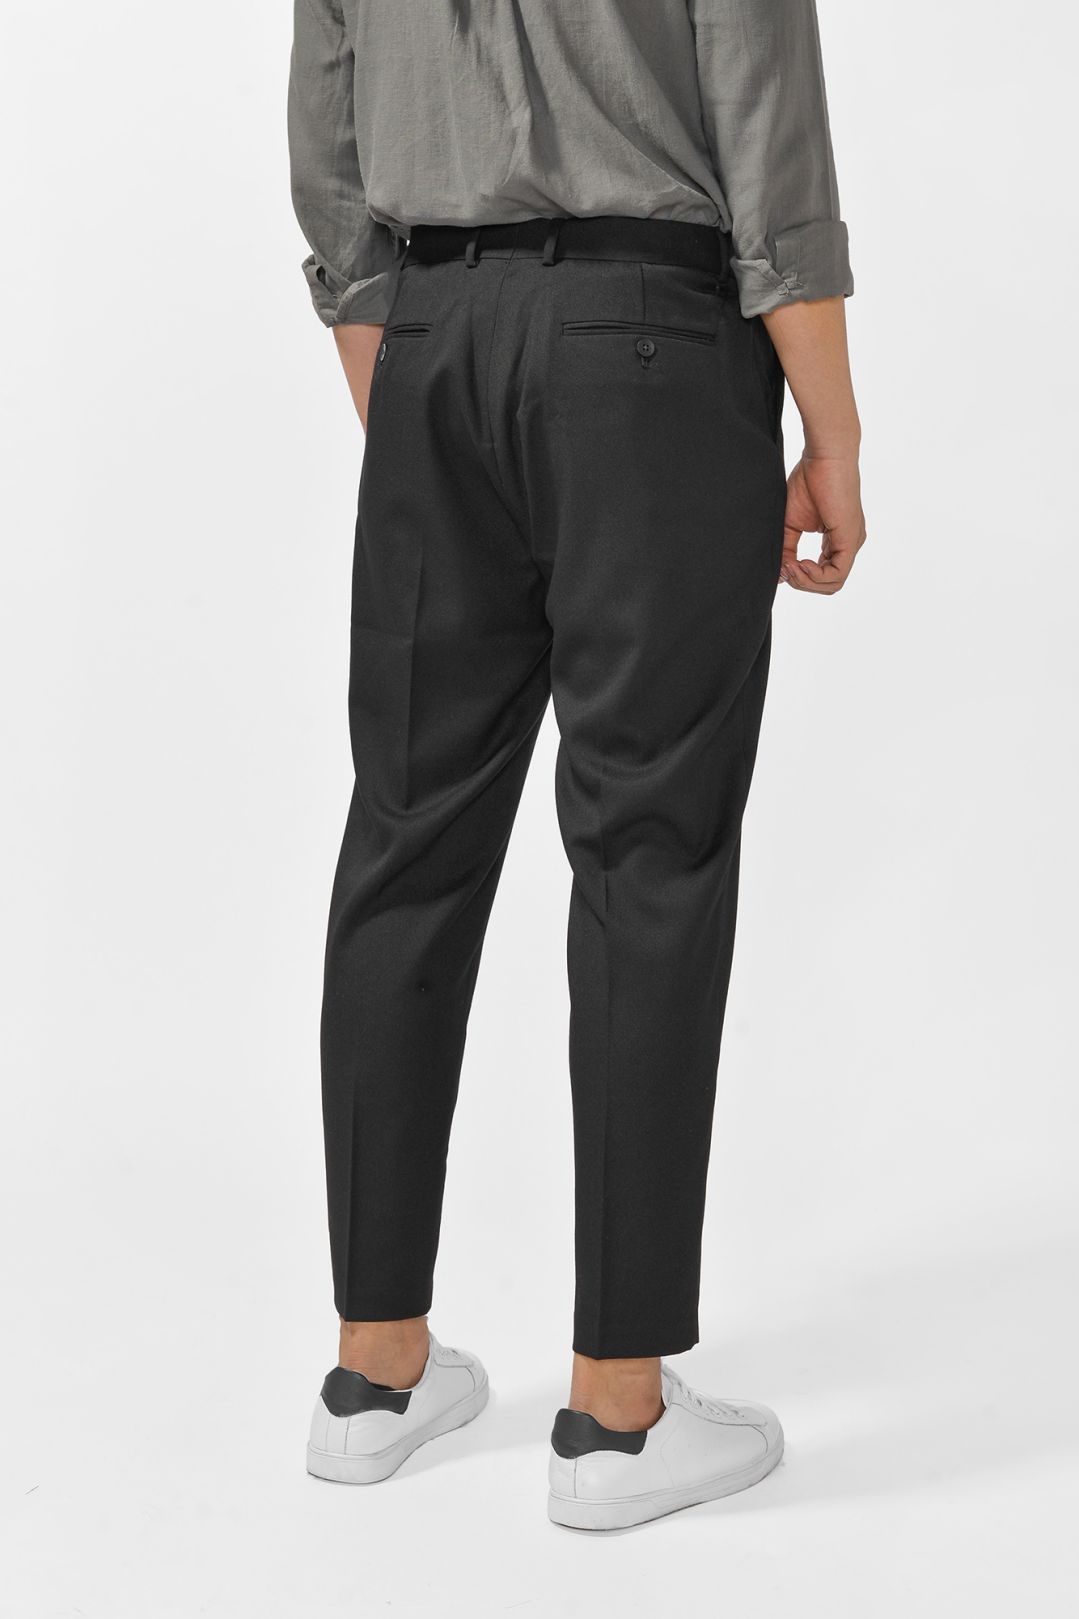 Carrot fit trousers | AD Europa